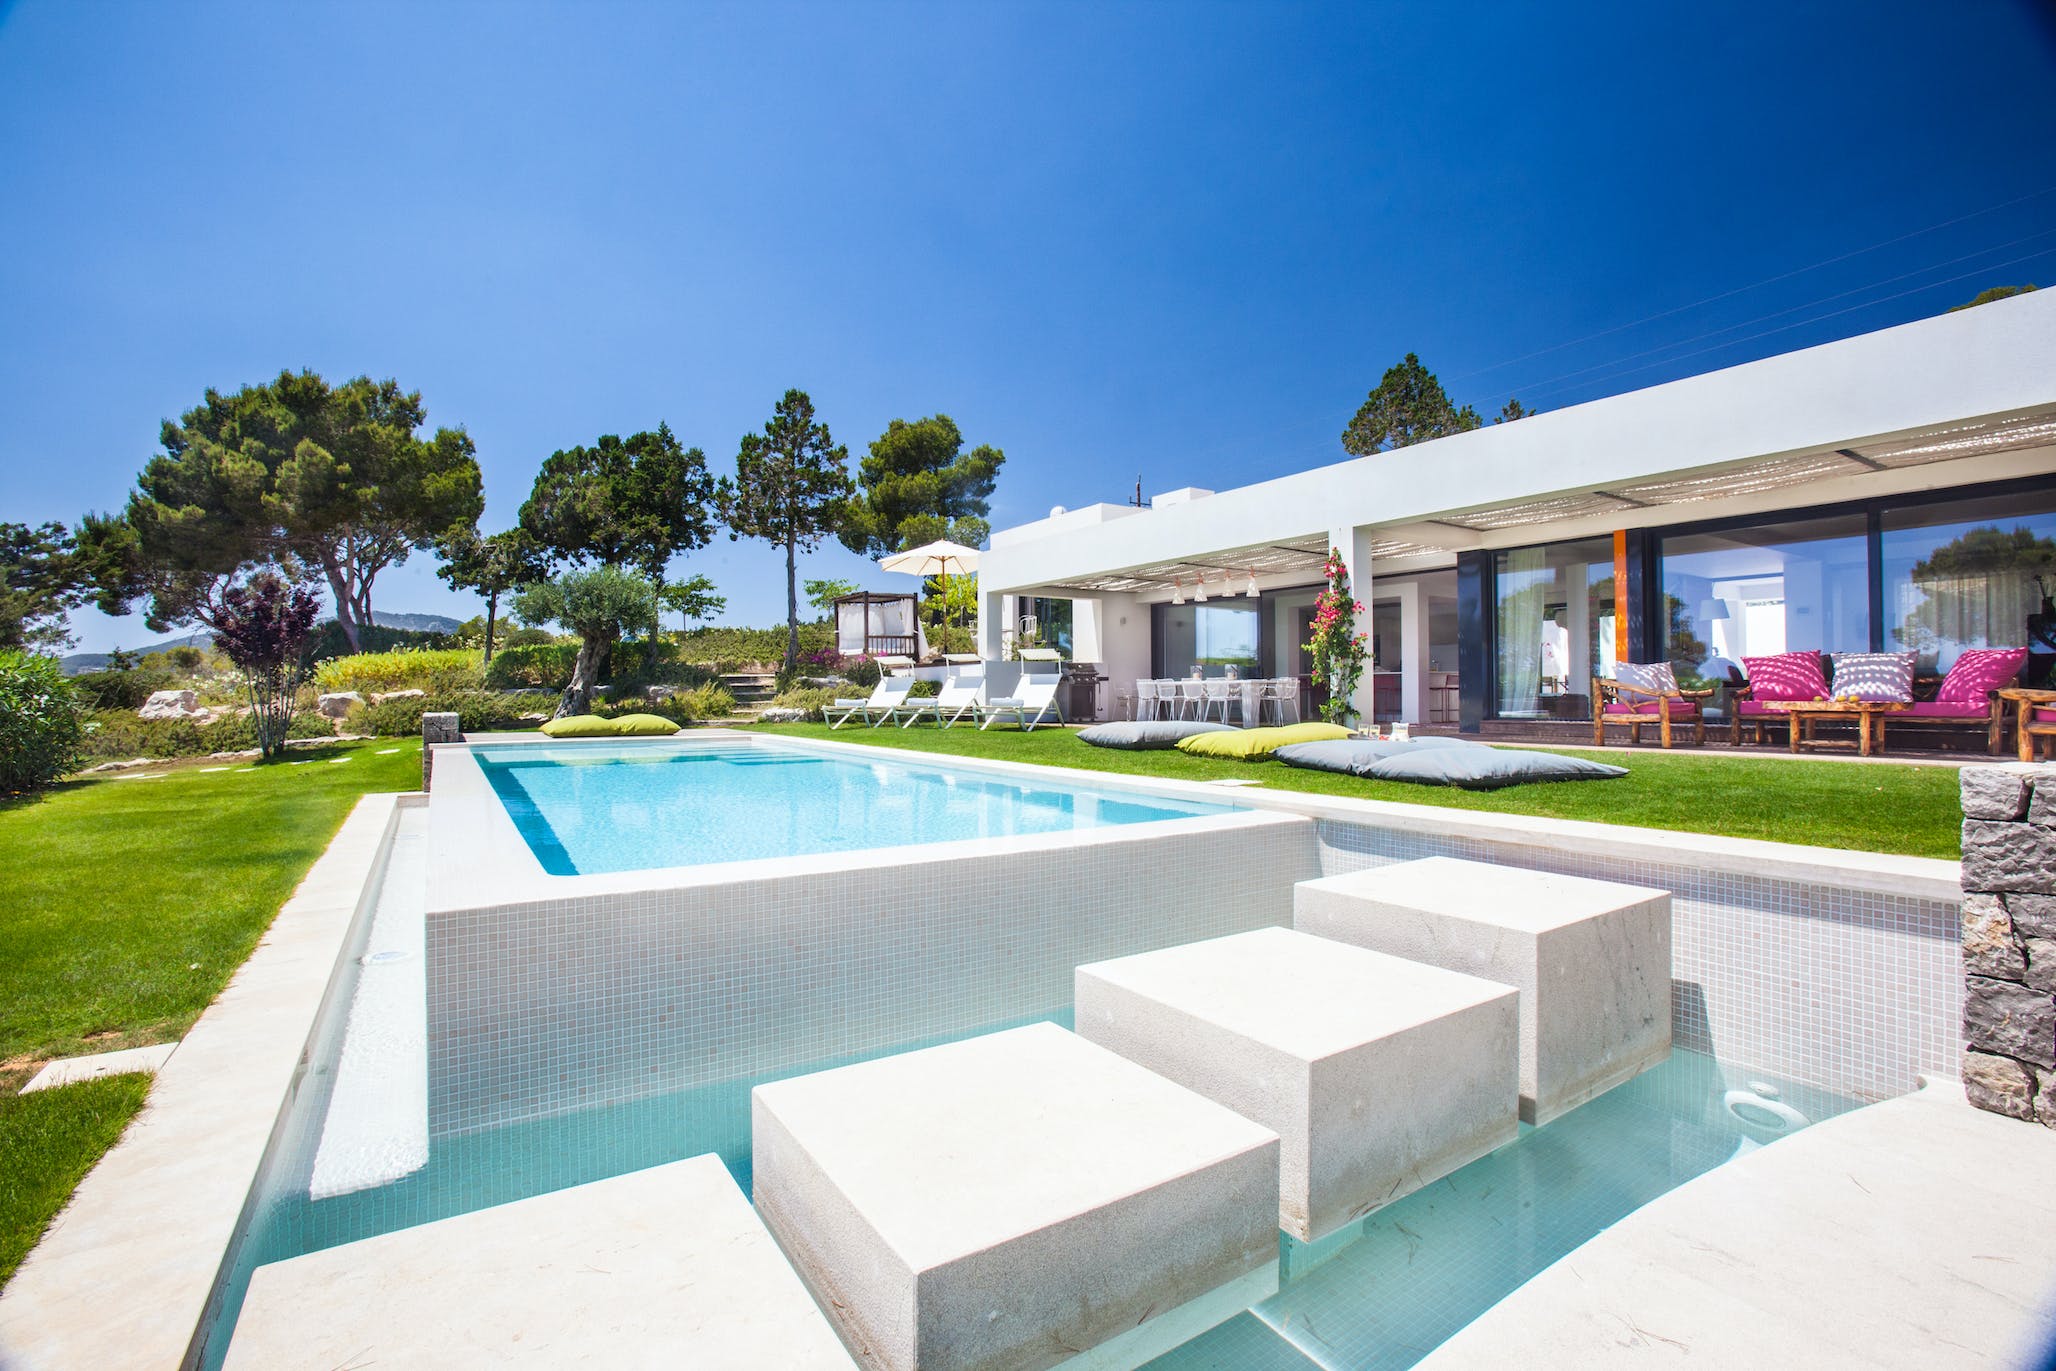 You are currently viewing Can Concordia – ‘Modern, well styled 5 bedroom house with beautiful views of the countryside and Cala Jondal.’